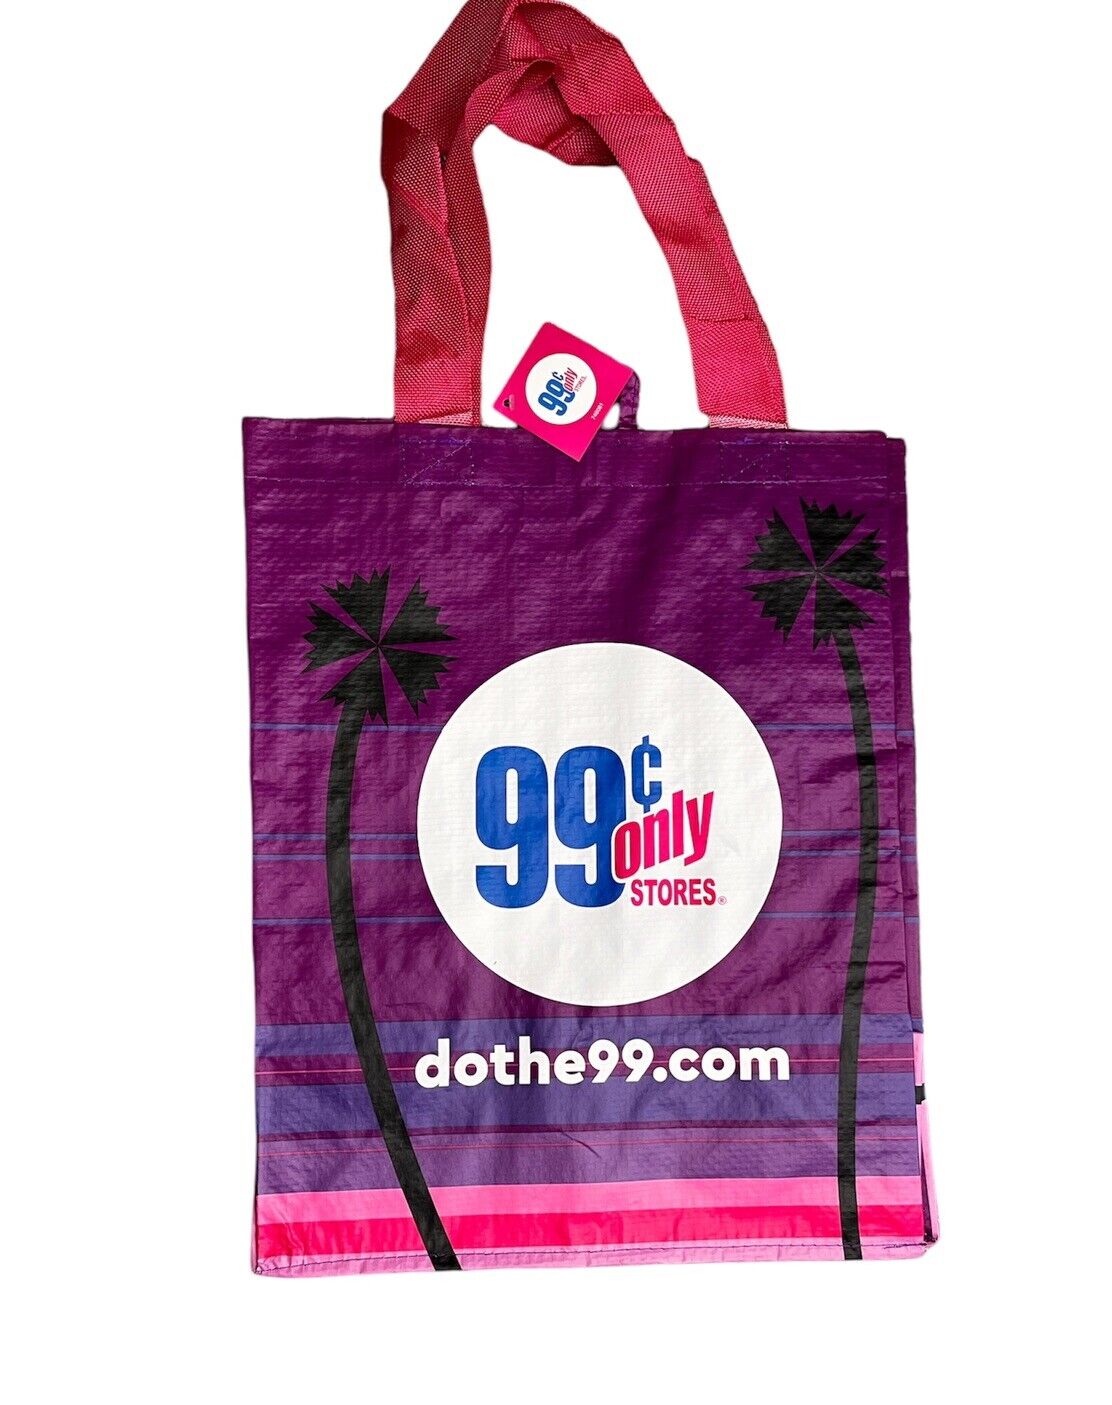 99 Cents Only Store Shopping Plastic Reusable NWT Bag STORES CLOSED DOWN REAR